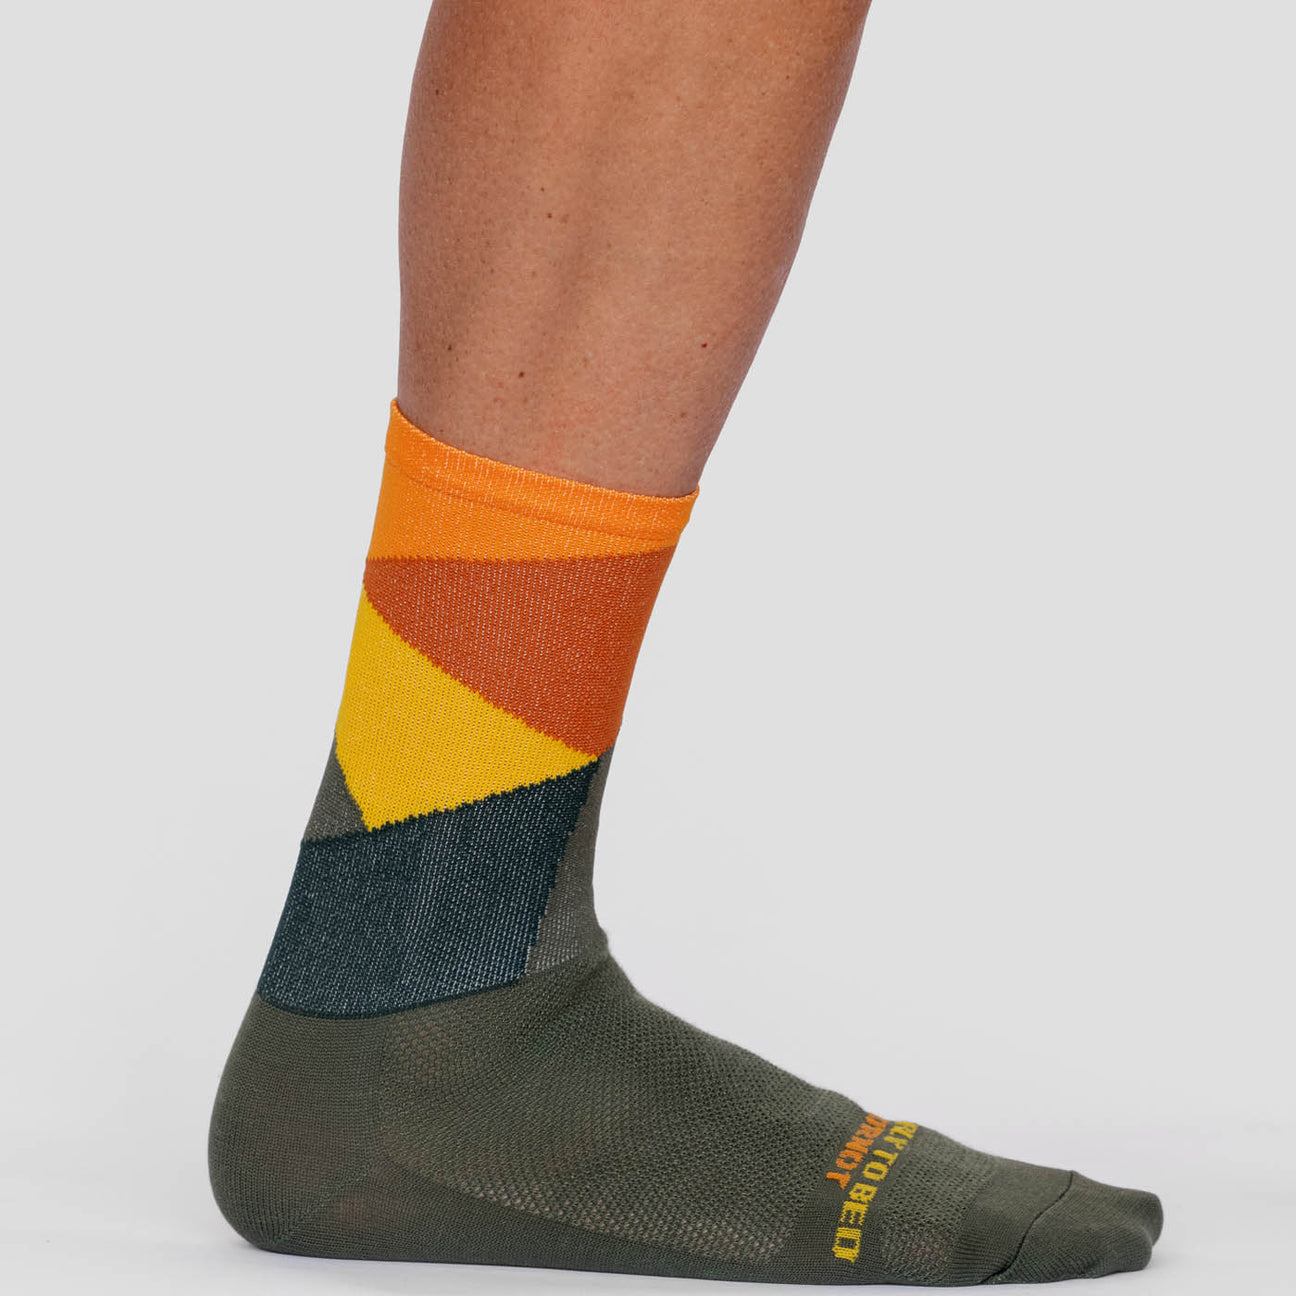 Intersection Olive Orange Sock (Limited Sizes) – Ornot Online Store